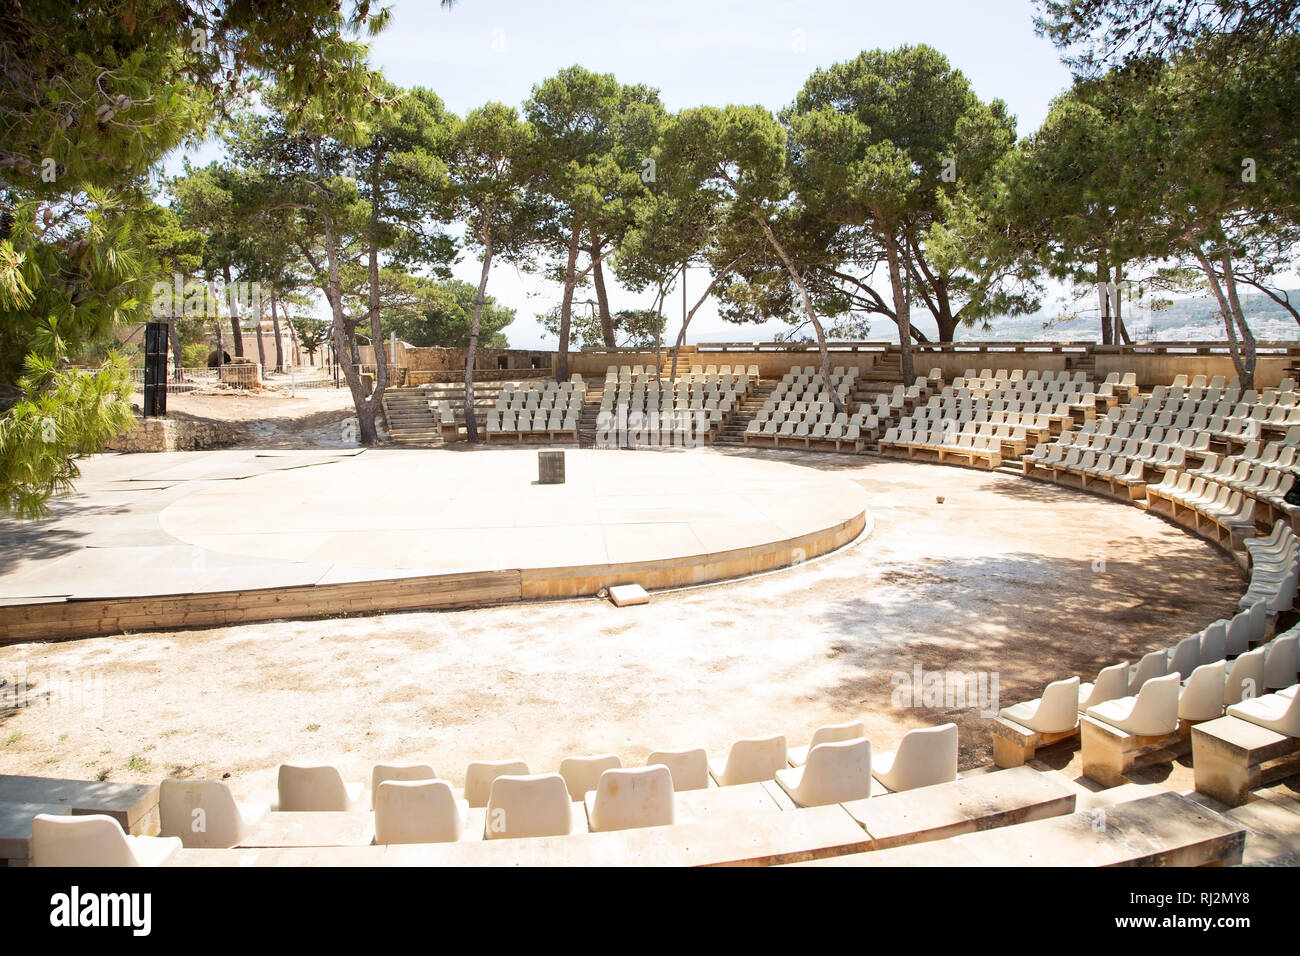 Contemporary amphitheater in the old town of Rethymno, Crete, Greece Stock Photo